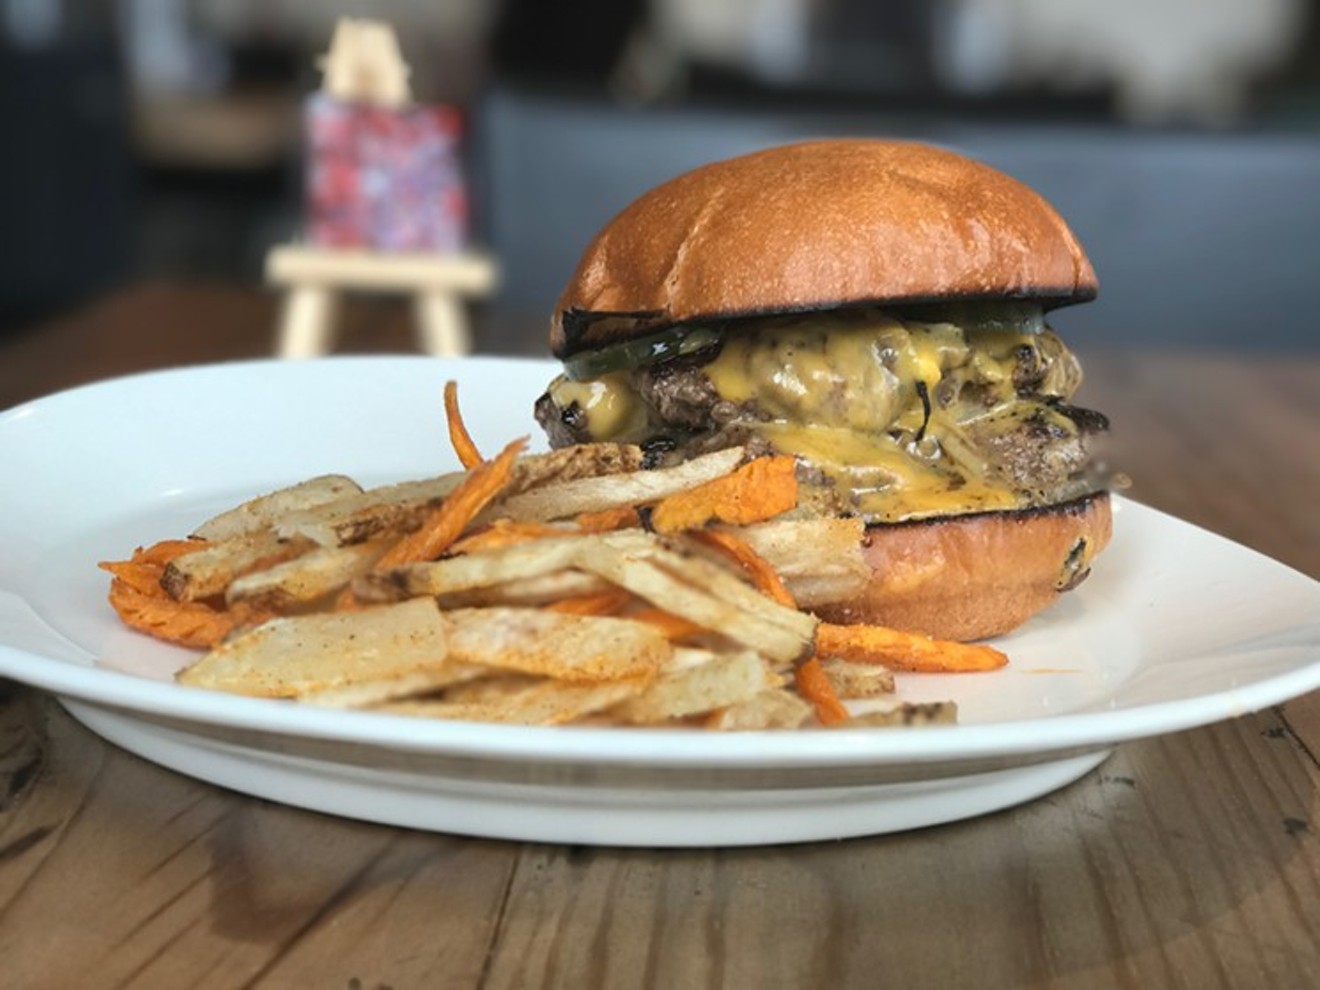 There's a reason this burger won best burger in Dallas, and that reason is deliciousness.